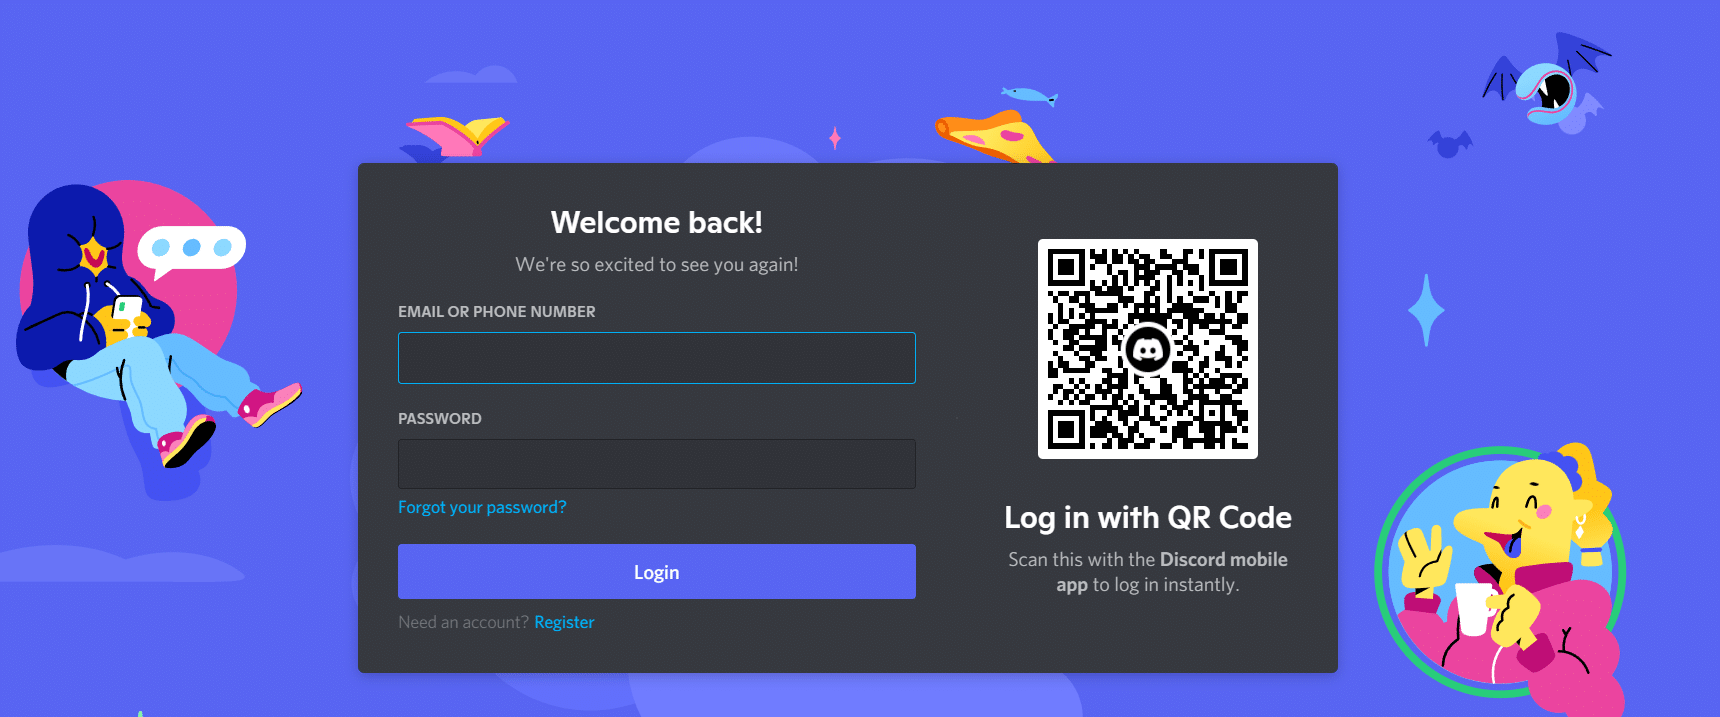 Discord Login page. How to Fix Discord Camera Not Working on Windows 10